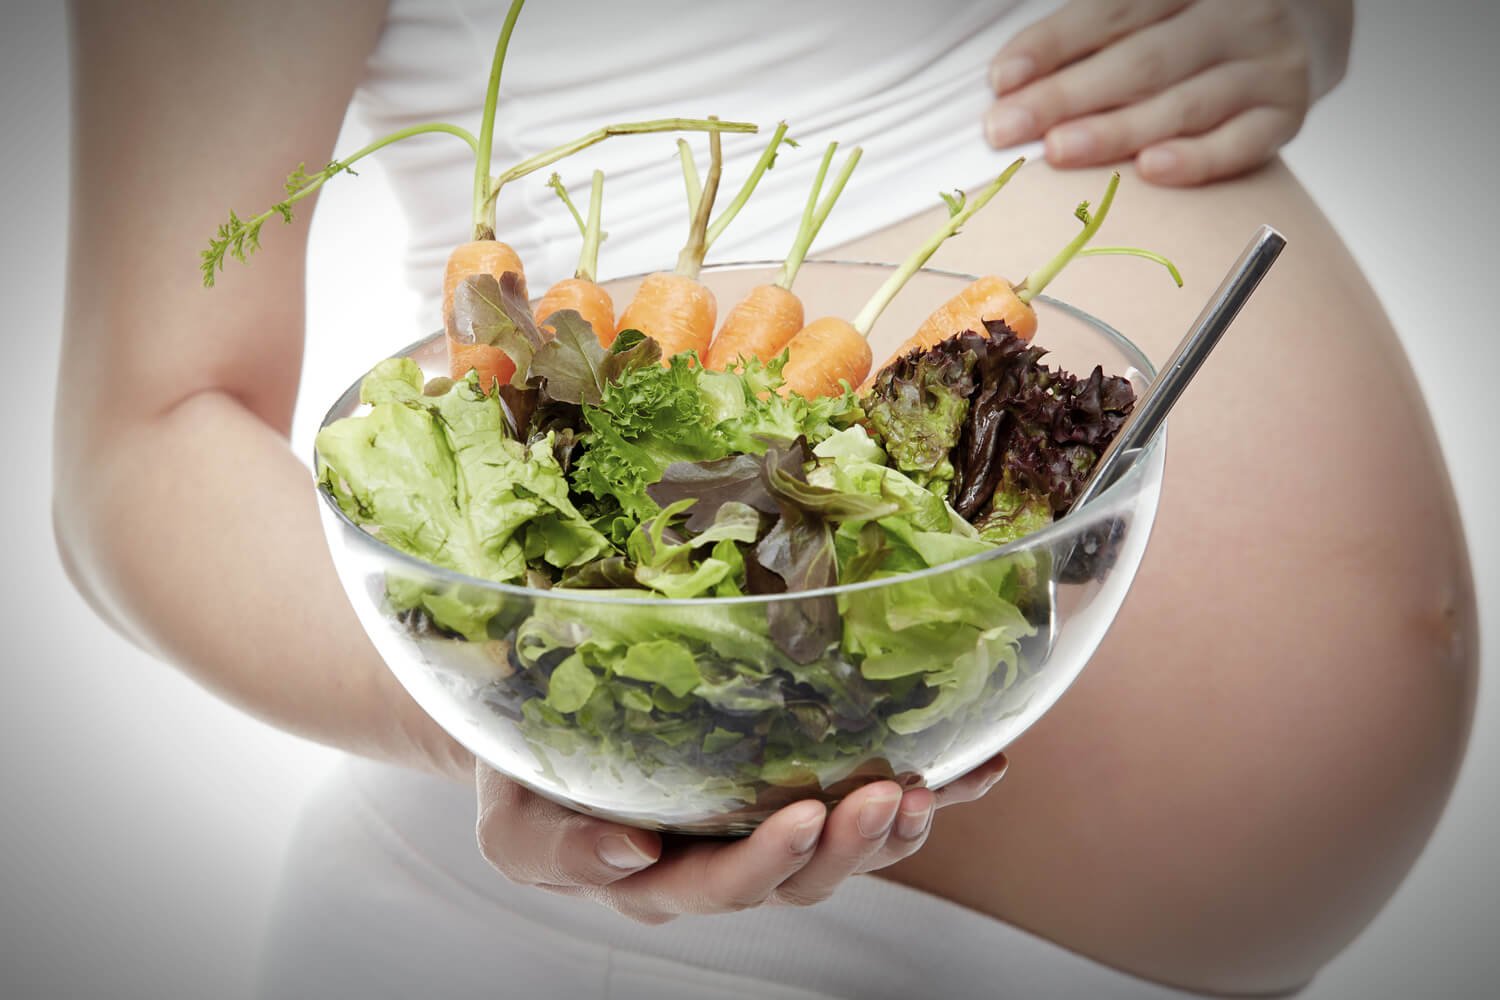 how-to-eat-vegetables-when-pregnant-what-salads-to-avoid